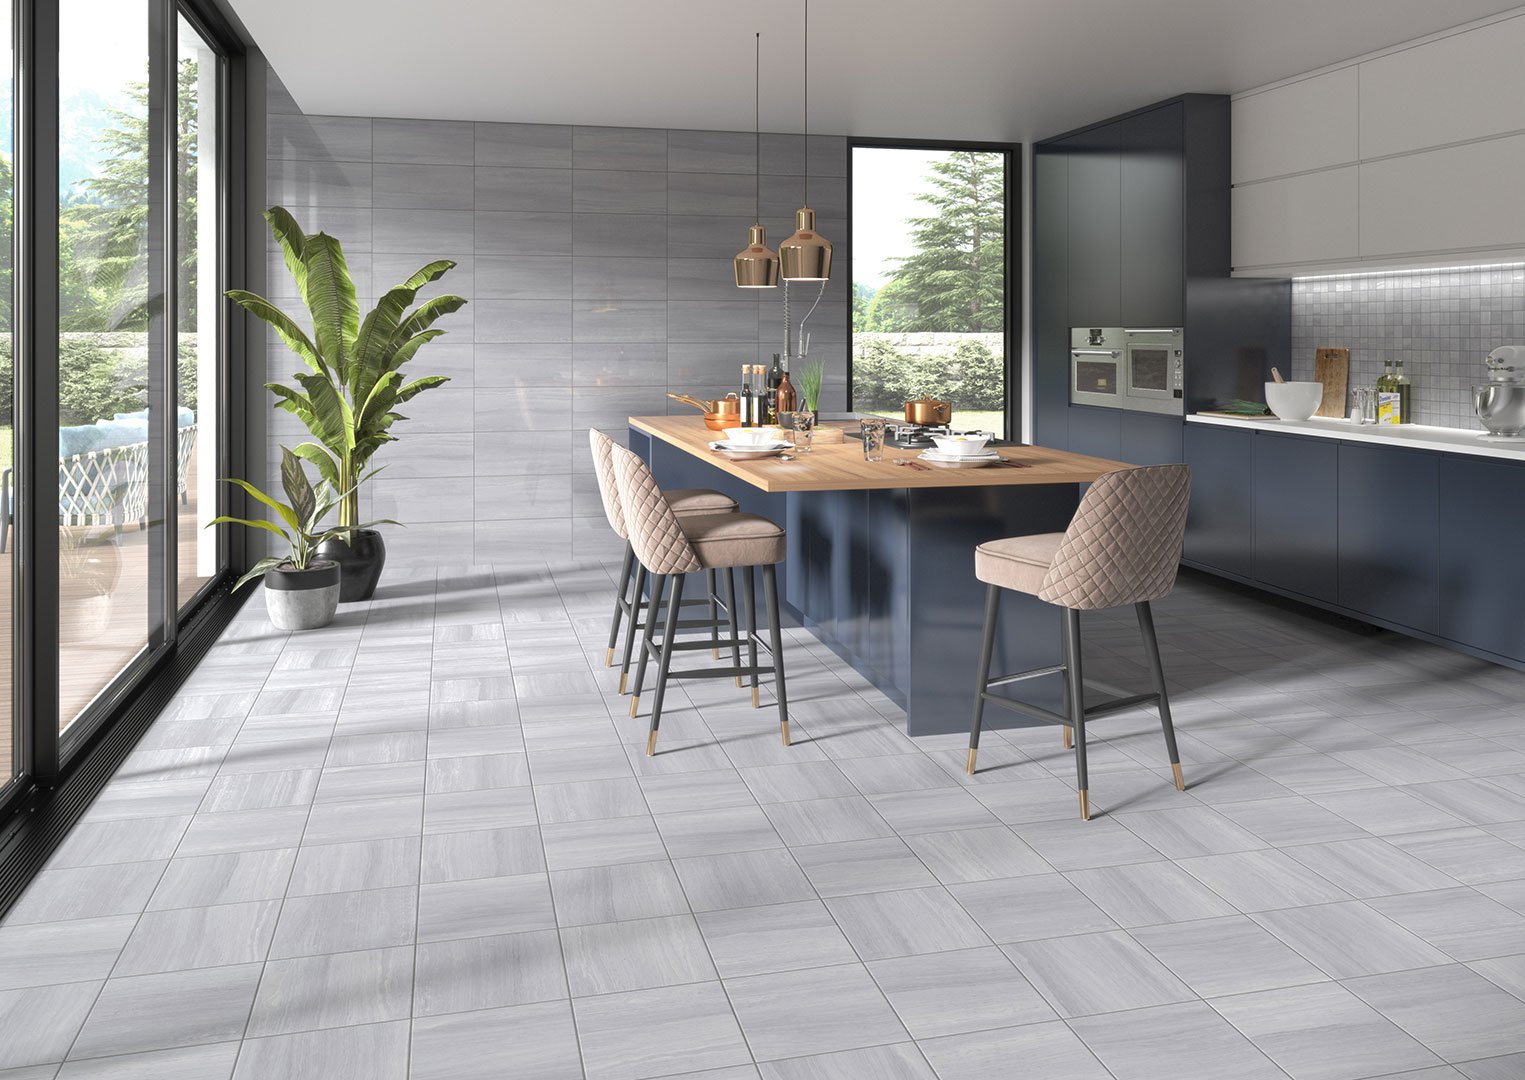 Pros and Cons of Ceramic Tile Floors in Your Kitchen